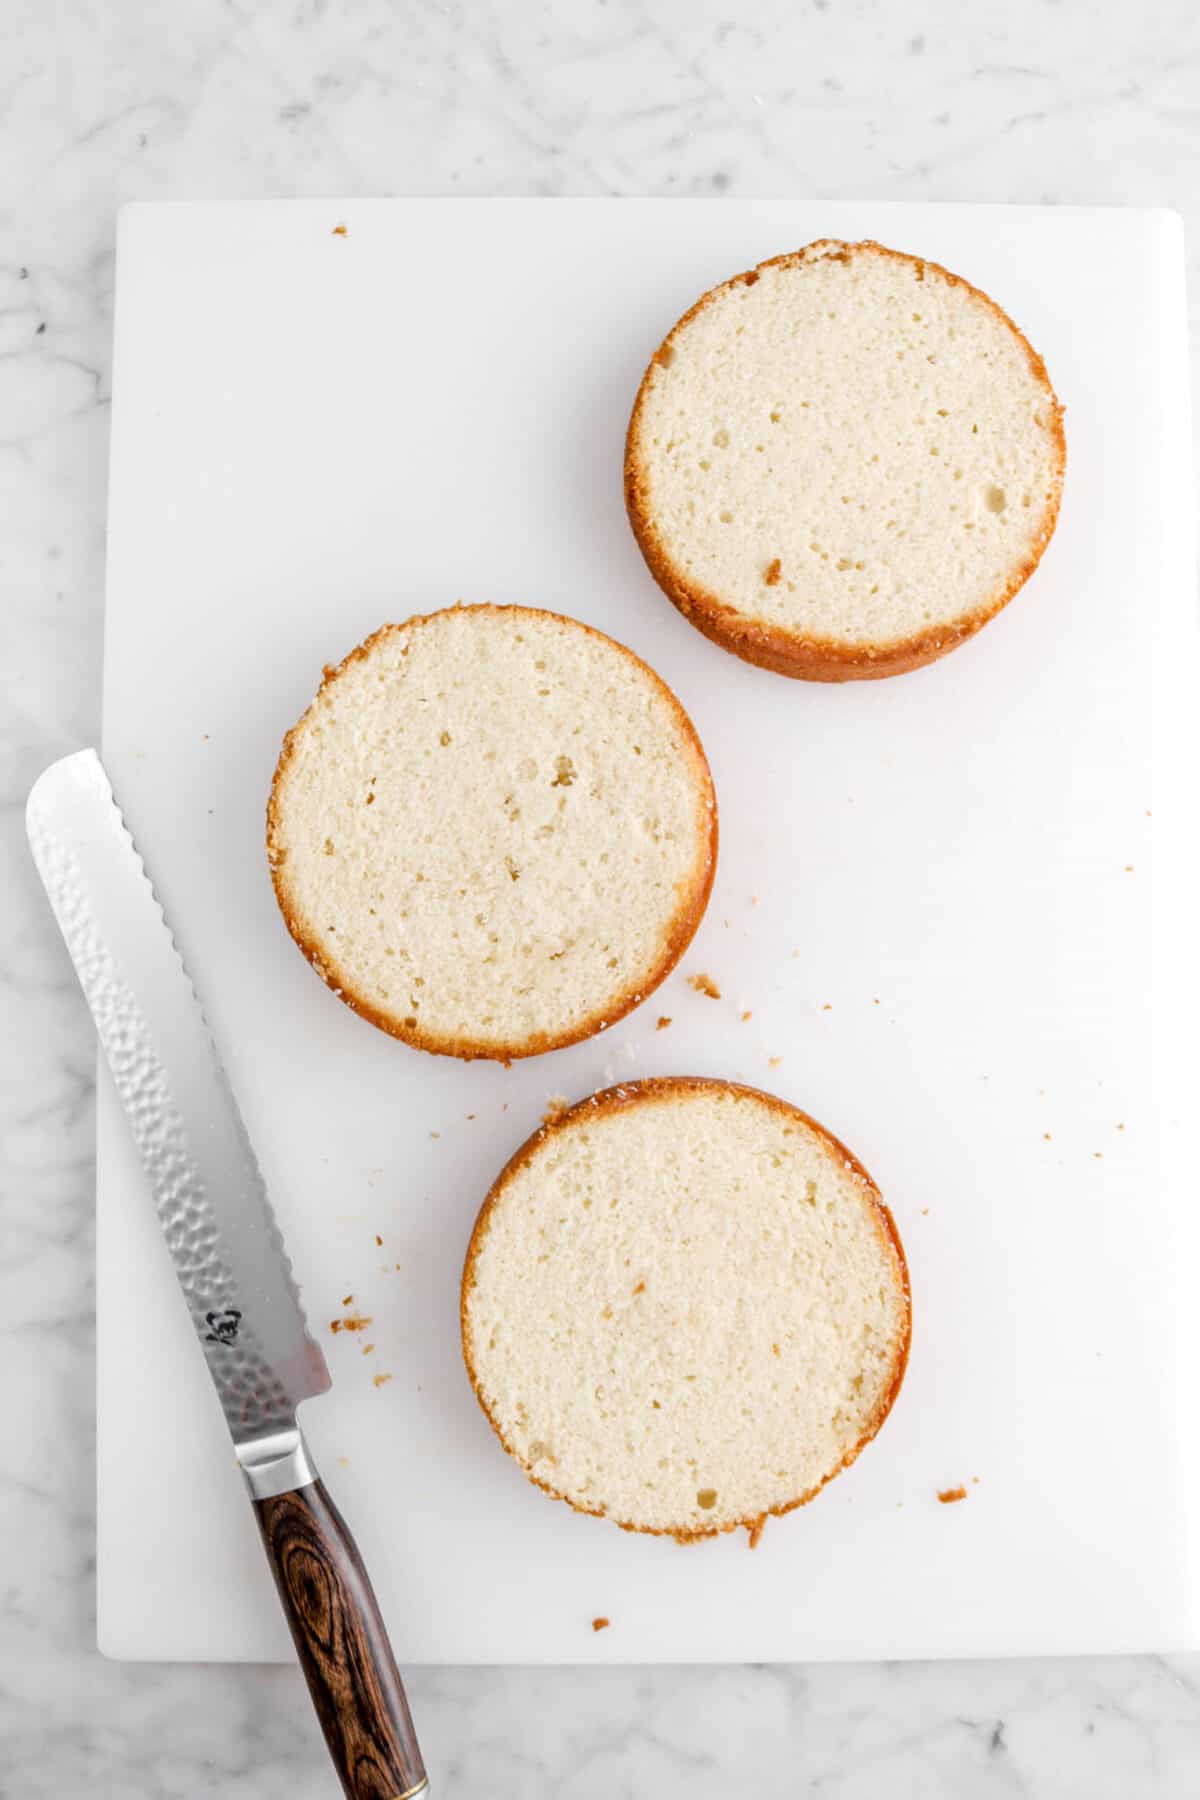 three round cakes with tops cut off on white cutting board